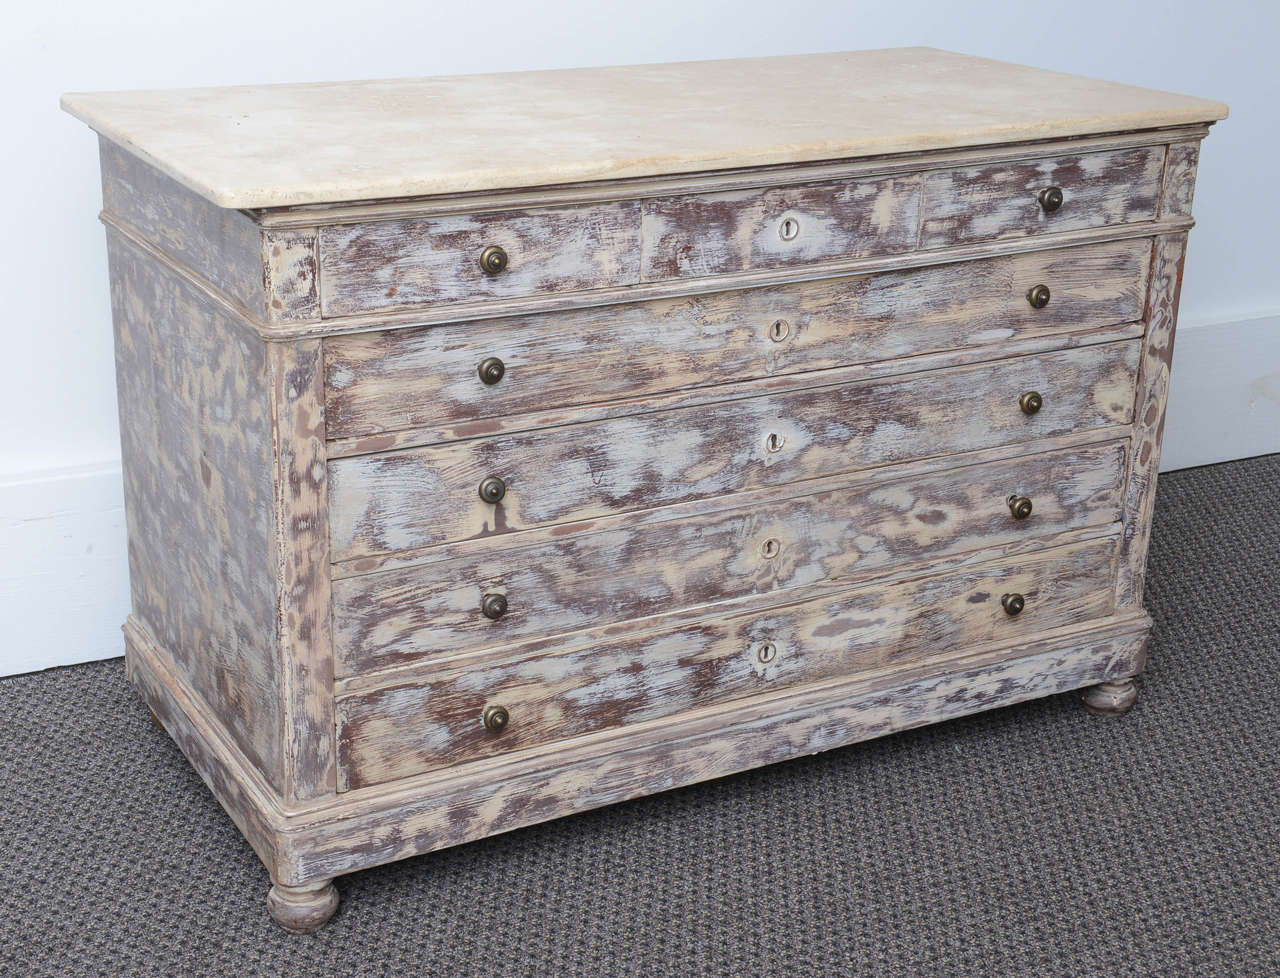 This is a very heavy duty solid oar hand-painted chest of drawers. The drawers are all solid oak with dovetails joints.